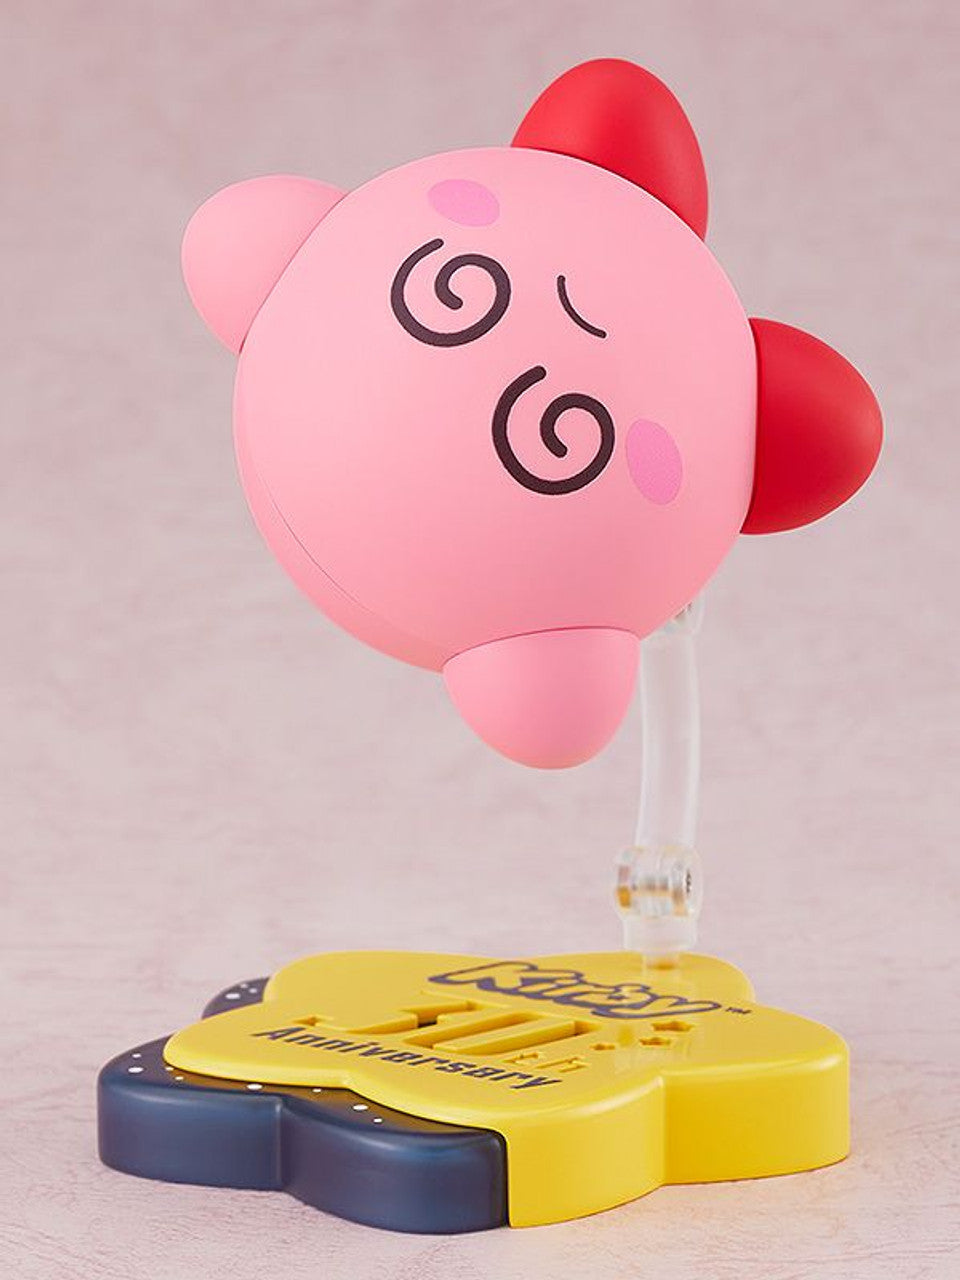 Nendoroid [1883] 30th Anniversary Edition &quot;Kirby&quot; (Re-run)-Good Smile Company-Ace Cards &amp; Collectibles